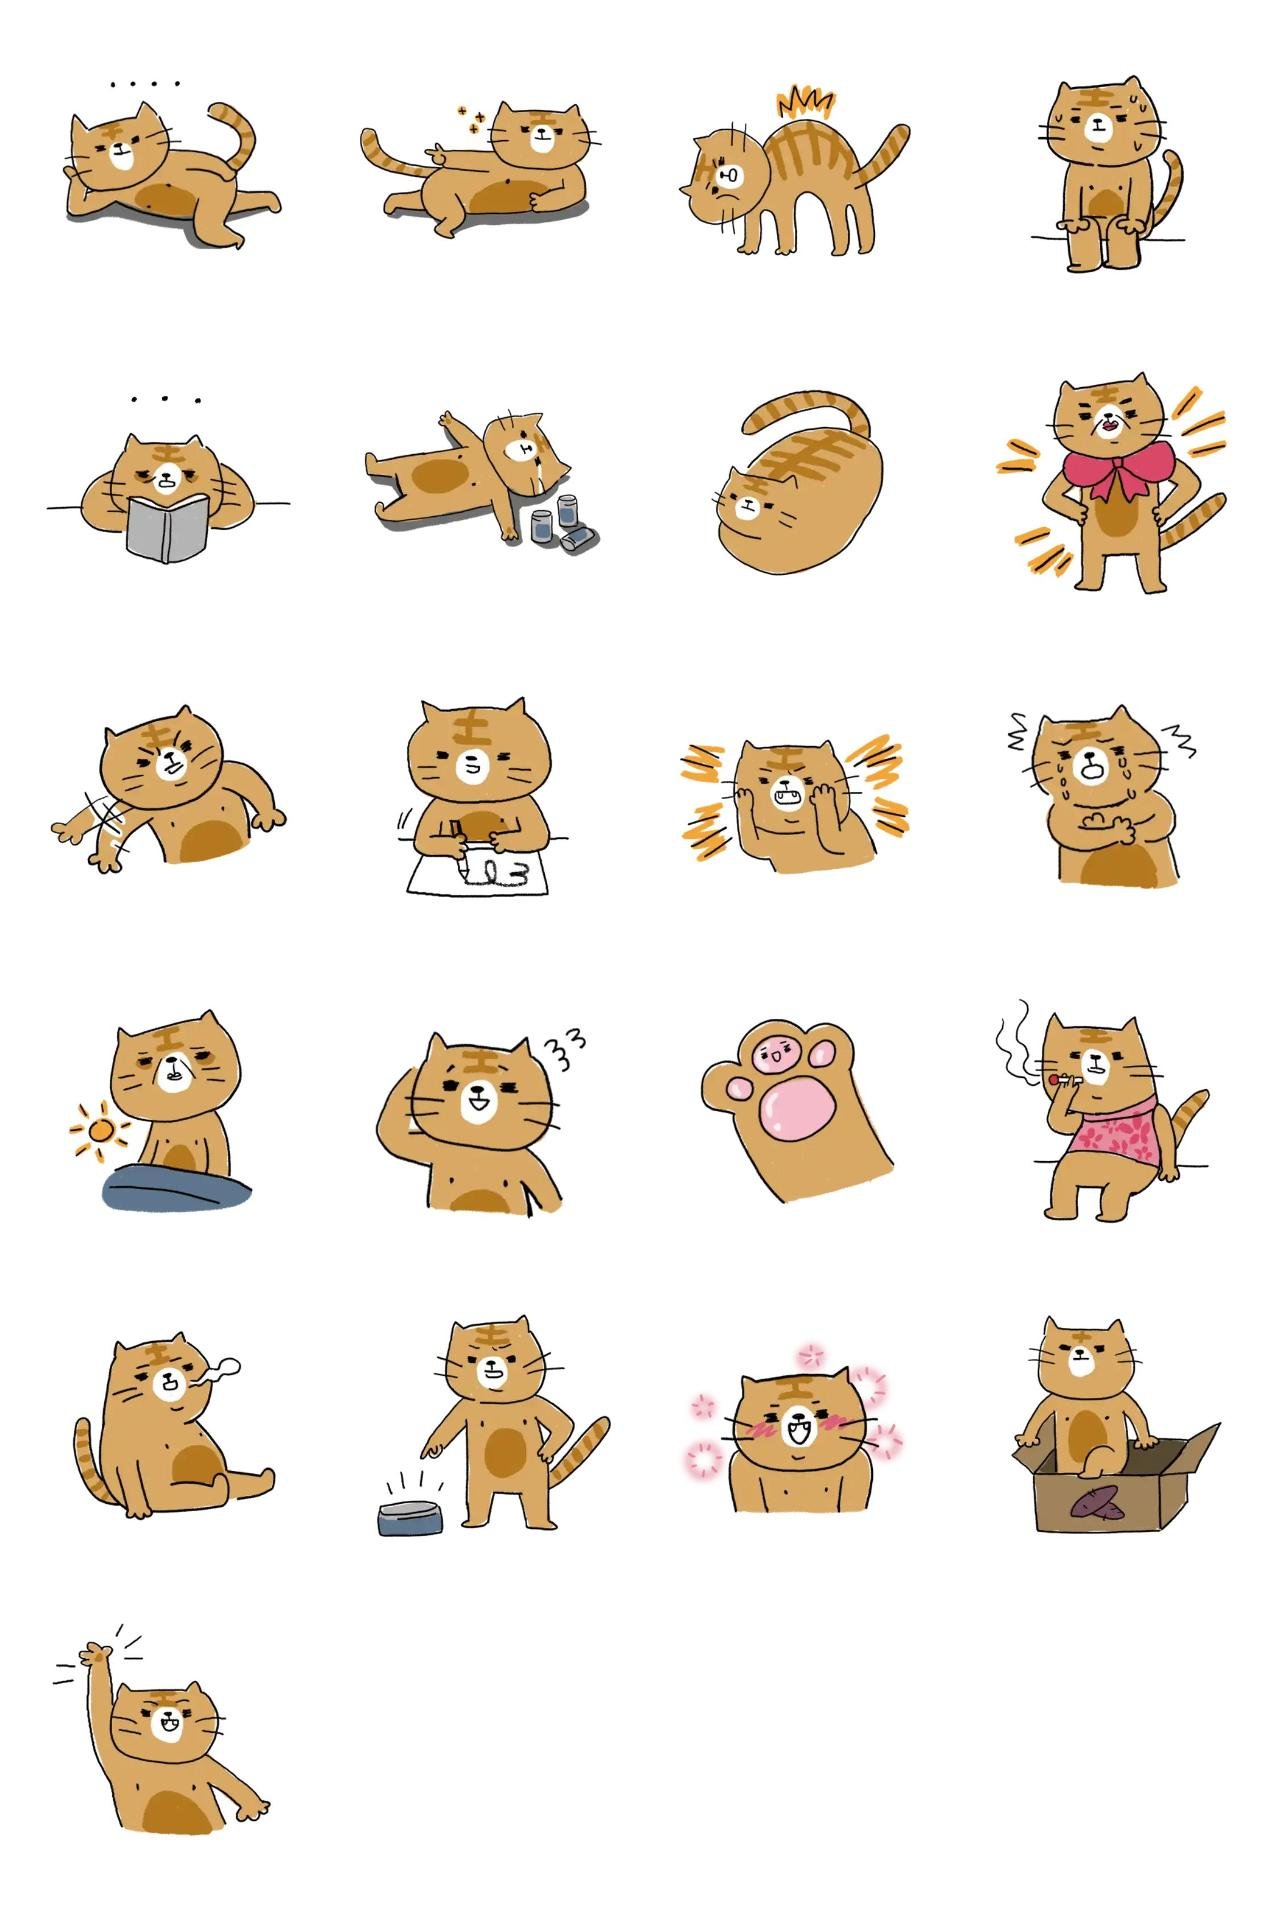 Kimozzi Animals,Gag sticker pack for Whatsapp, Telegram, Signal, and others chatting and message apps